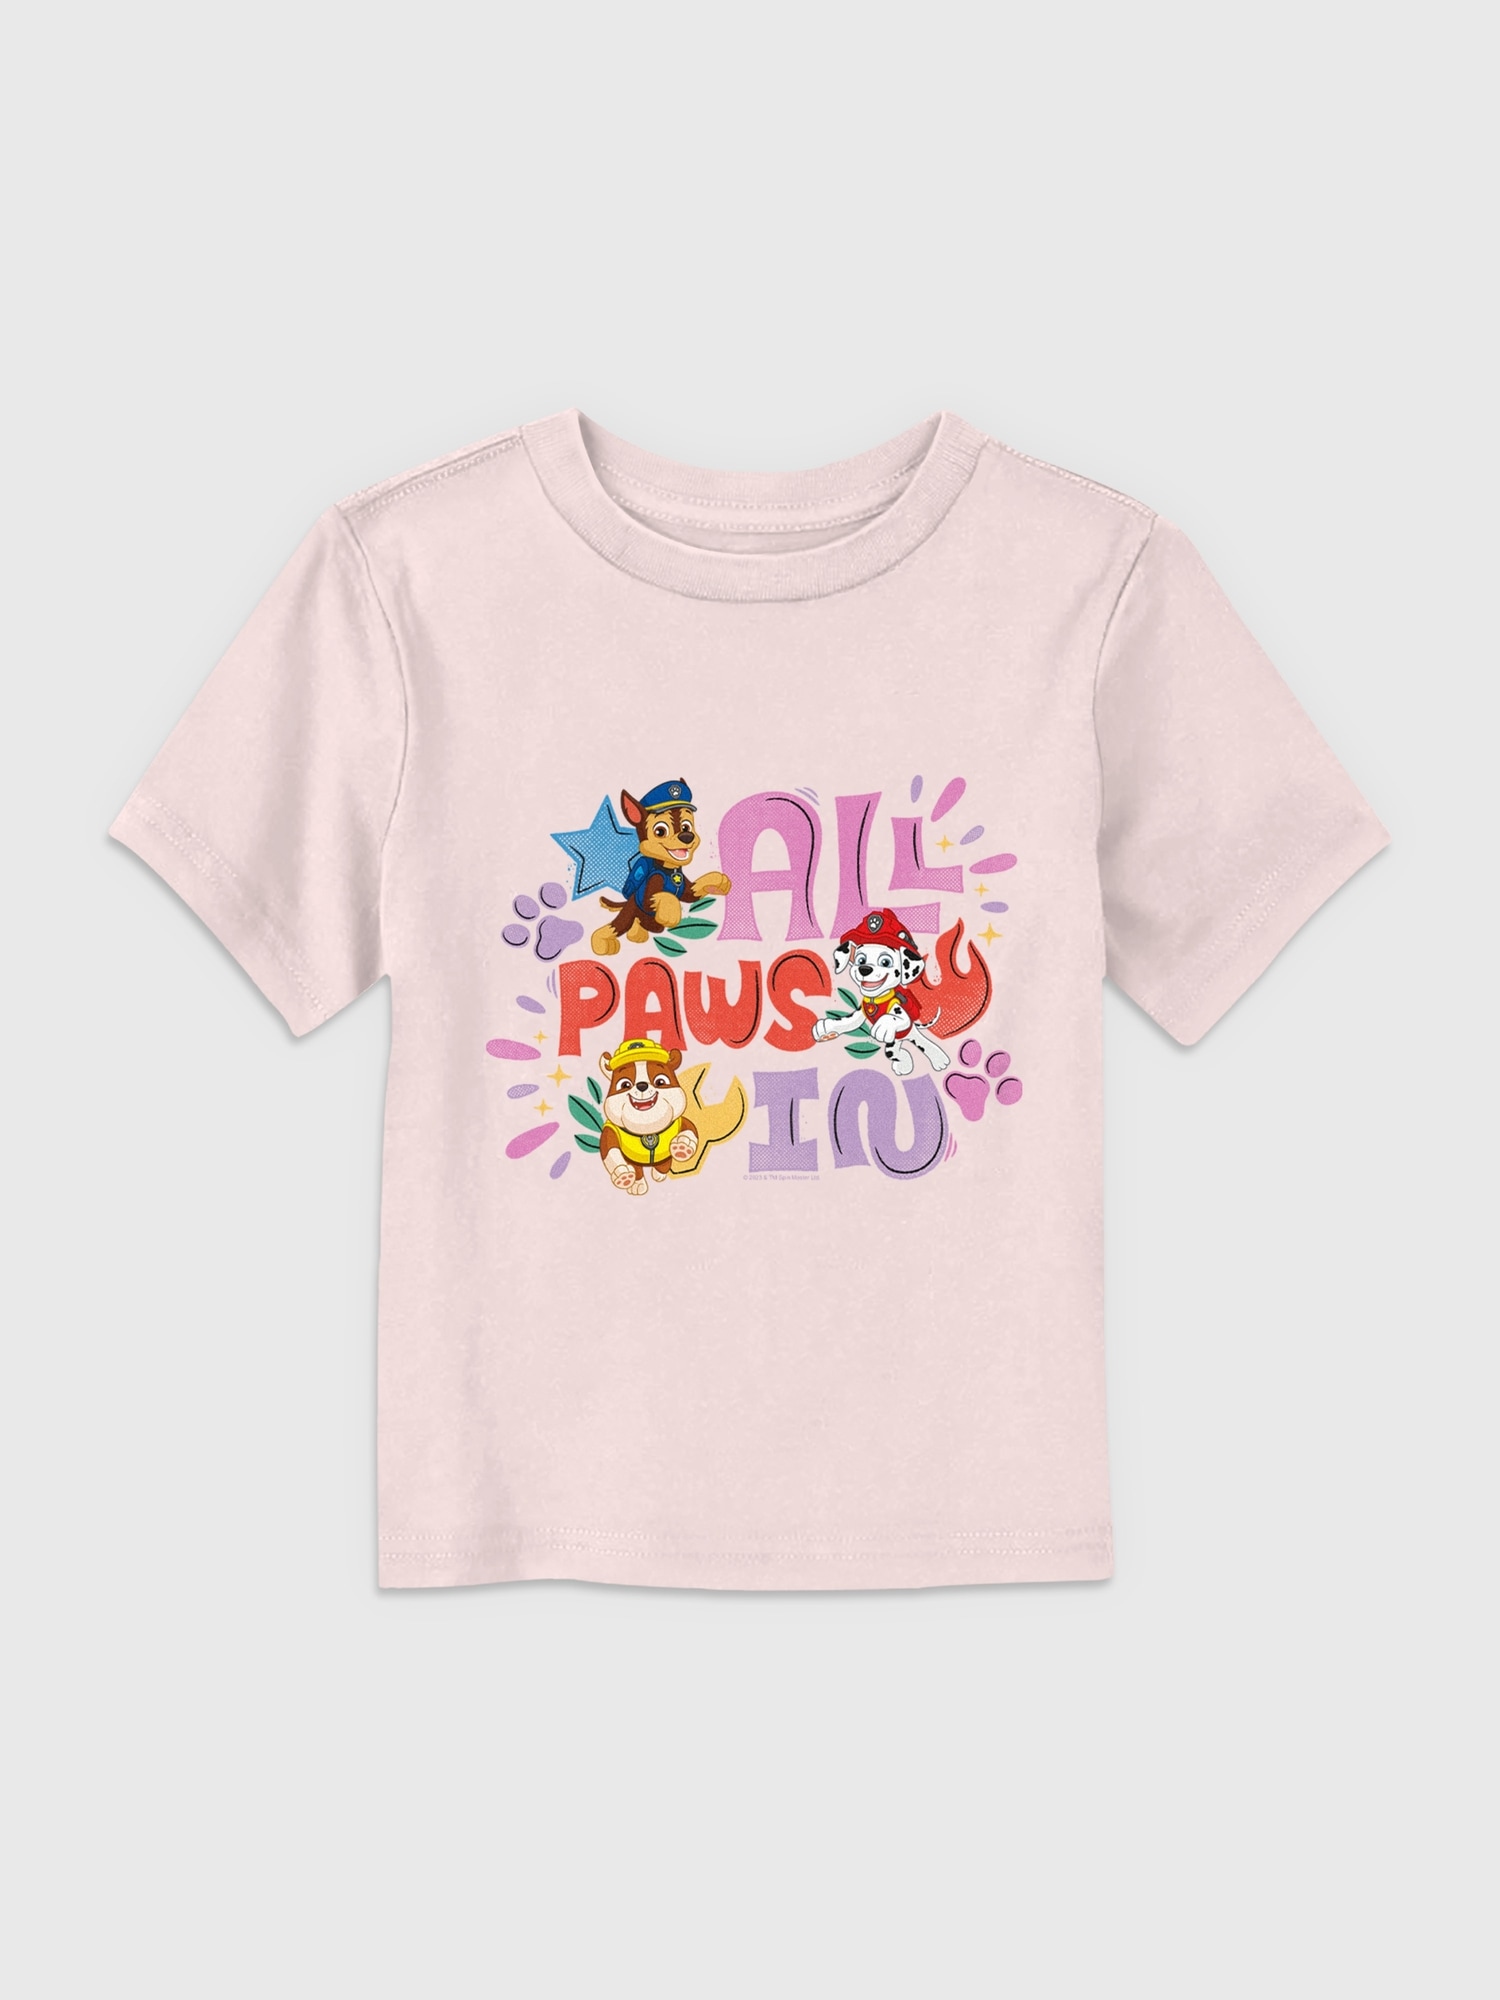 Toddler PAW Patrol All Paws In Graphic Tee | Gap